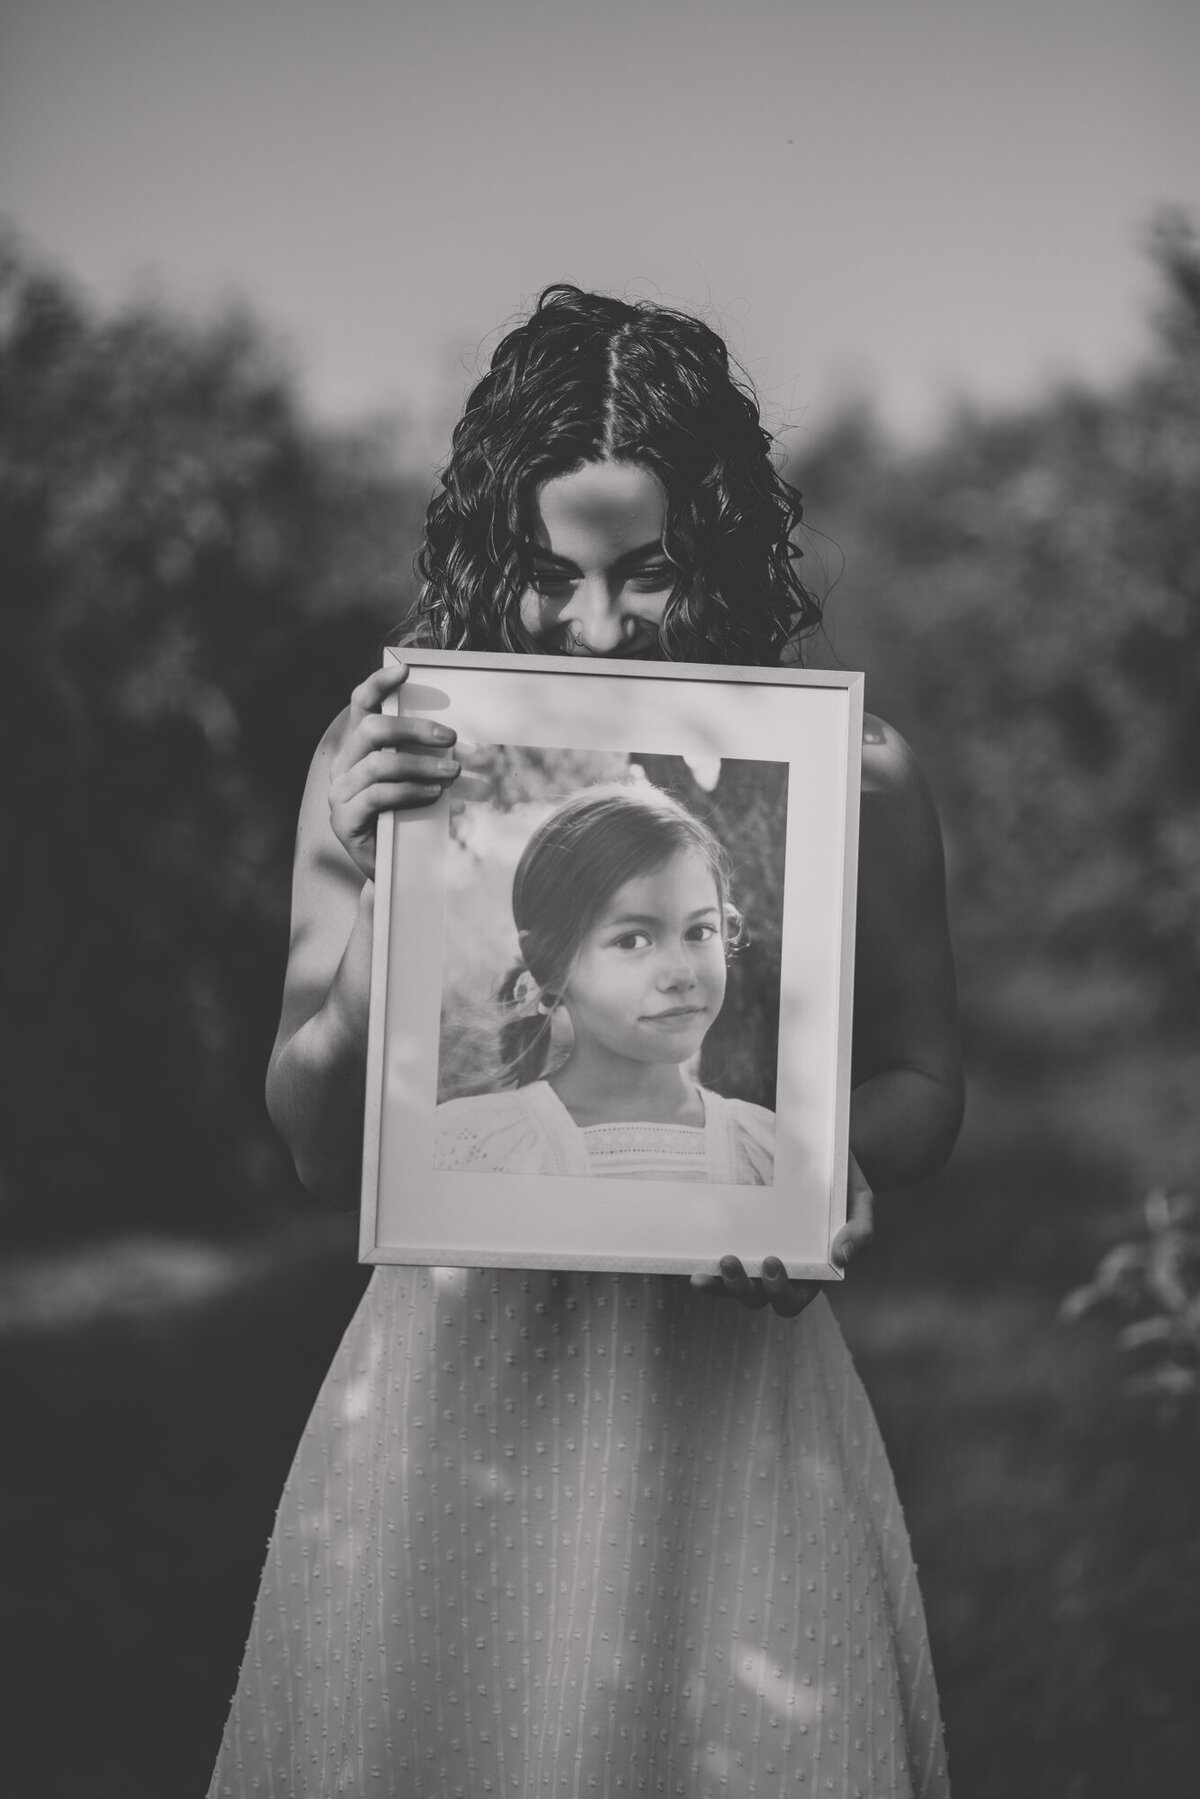 Black and white image of female in white dress holding a school age image of herself